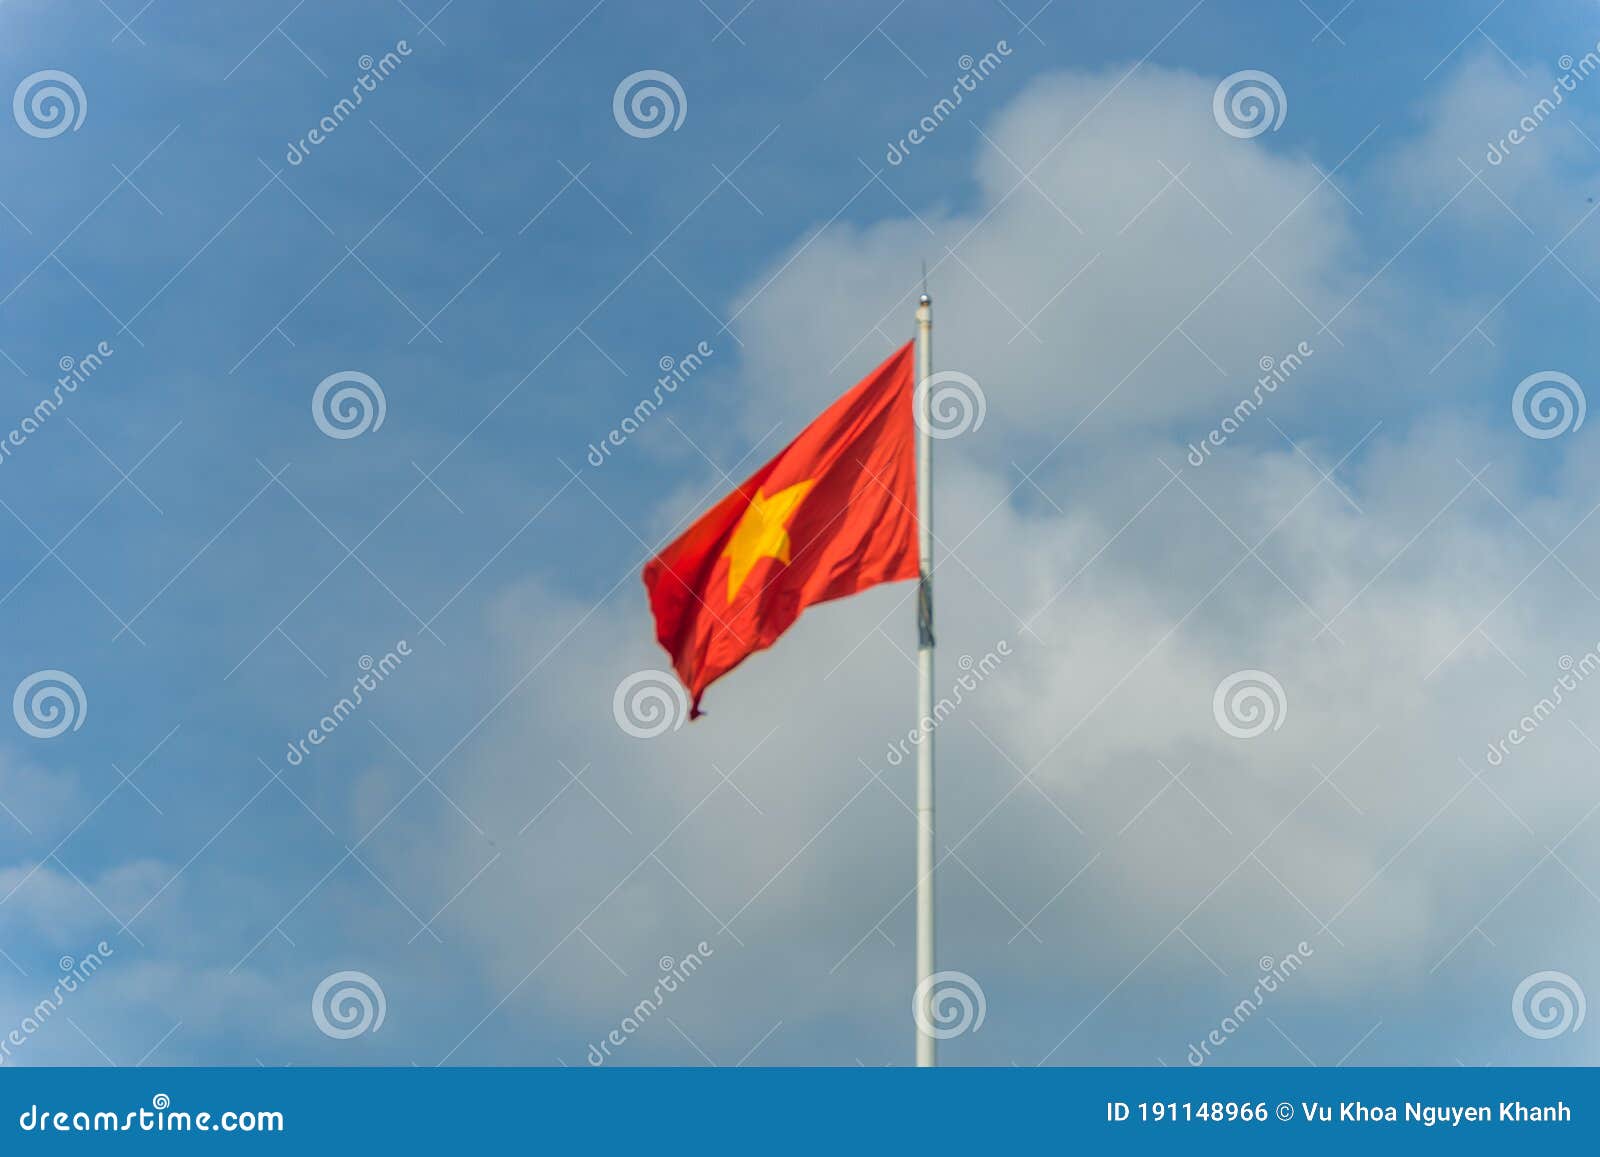 Red Flag with Yellow Star, Blue Sky with Clouds in Background. Rippled Texture. National Flag of Vietnam. Popular for Stock Illustration - Illustration of background, quality: 191148966